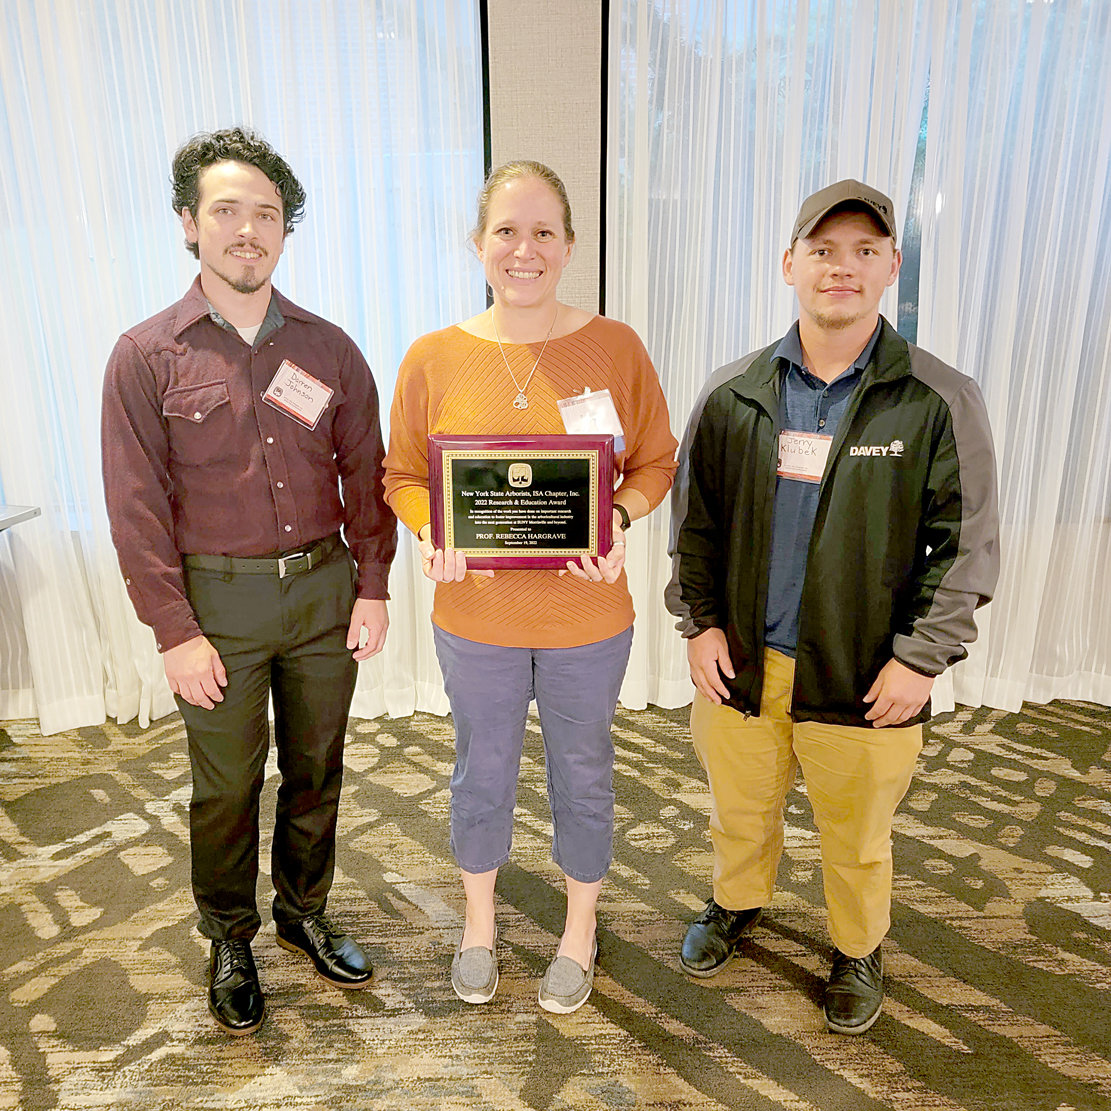 A professor and three students from the State University of New York at Morrisville recently received awards from the New York State Arborists, ISA Chapter. From left: Darren Johnson, a environmental conservation science major; Associate Professor Rebecca Hargrave; and Jerry Klubek, an environmental and natural resources management major. Not pictured is Camberly Van Valkenburg, an environmental and natural resources management major who also received an award.